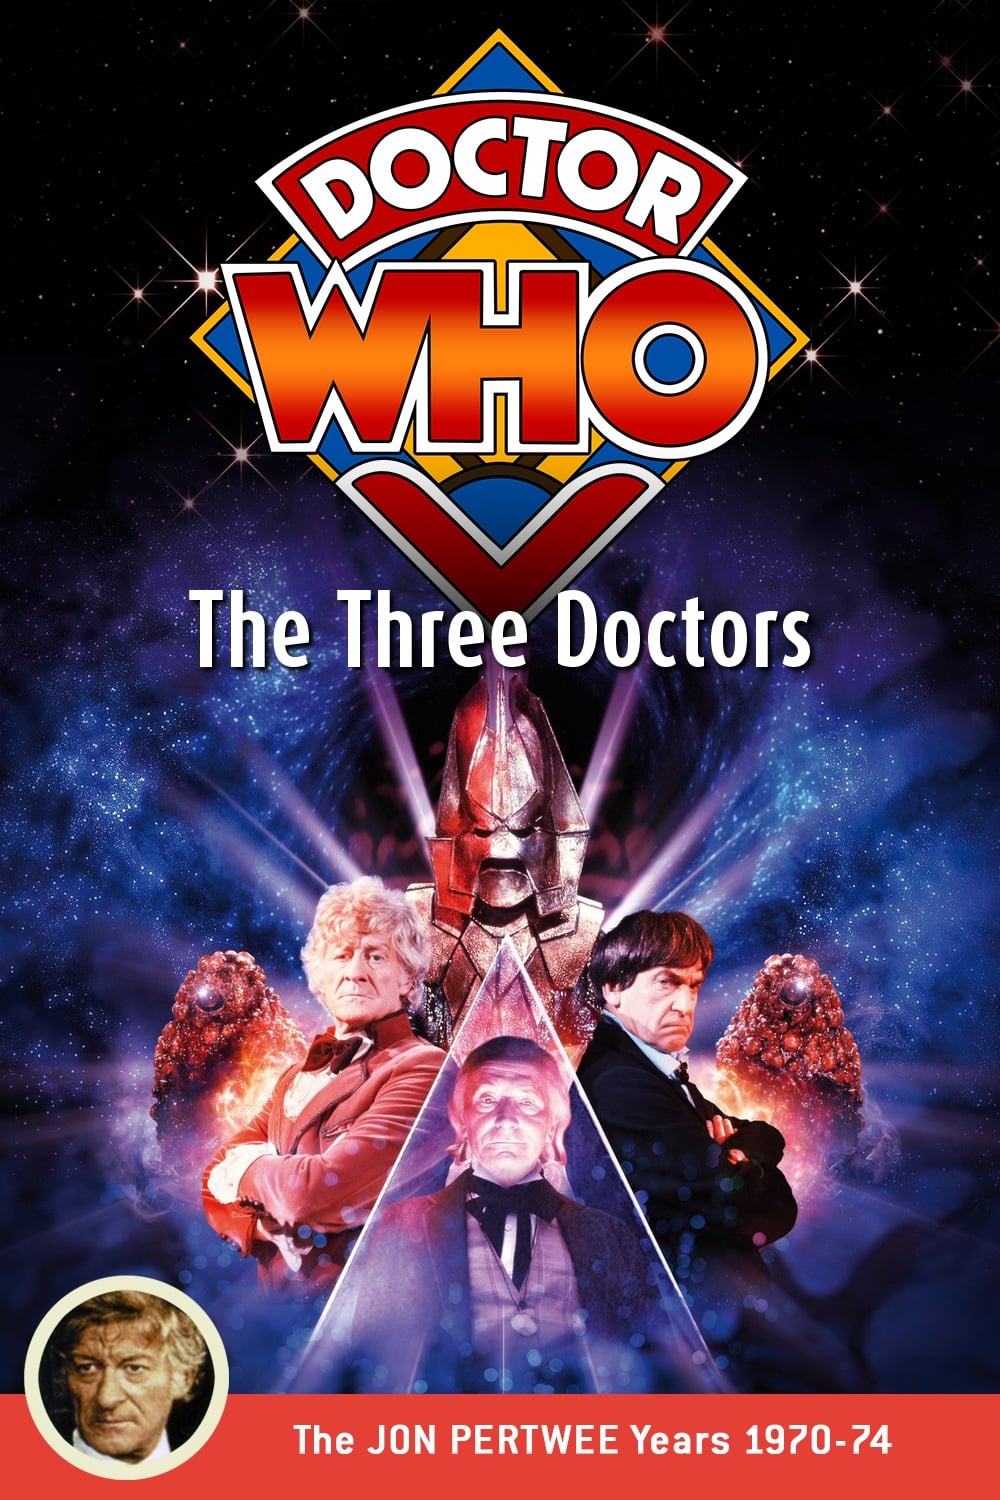 Doctor Who: The Three Doctors (1973)